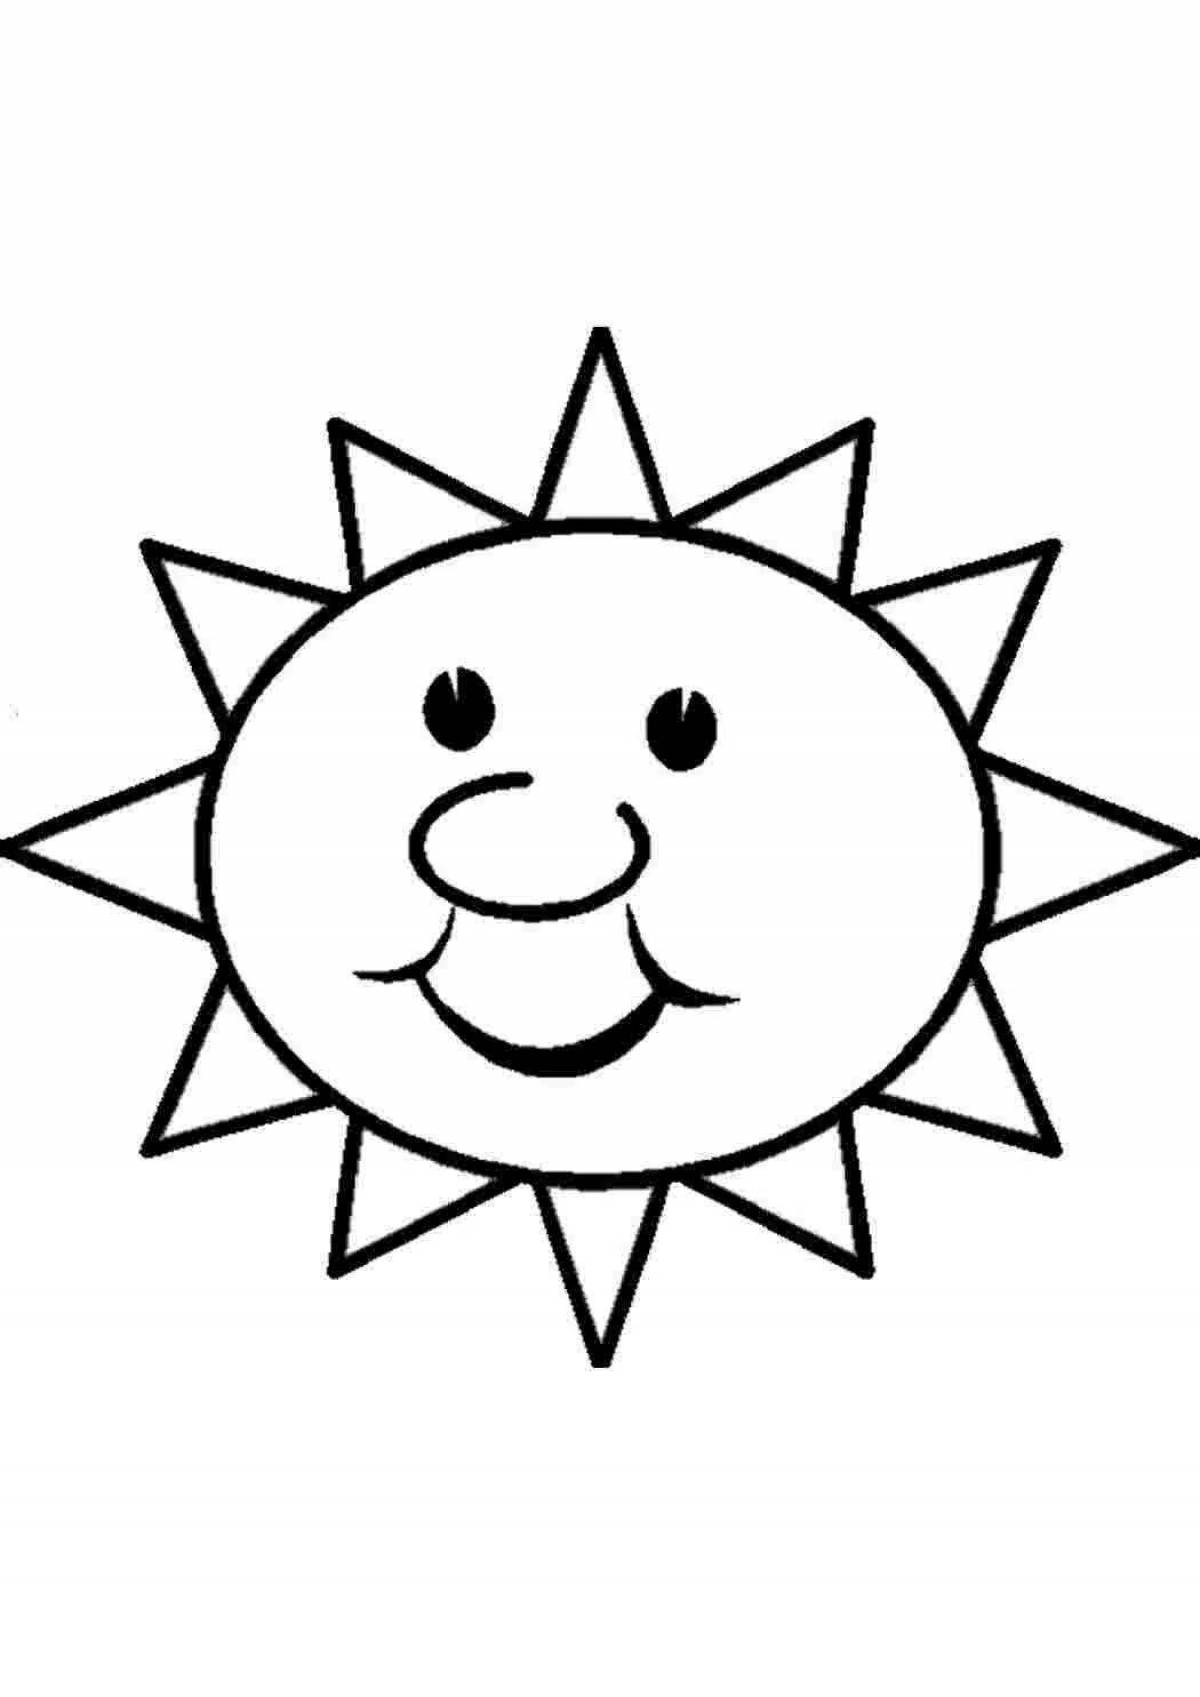 Colourful sun coloring book for children 3-4 years old